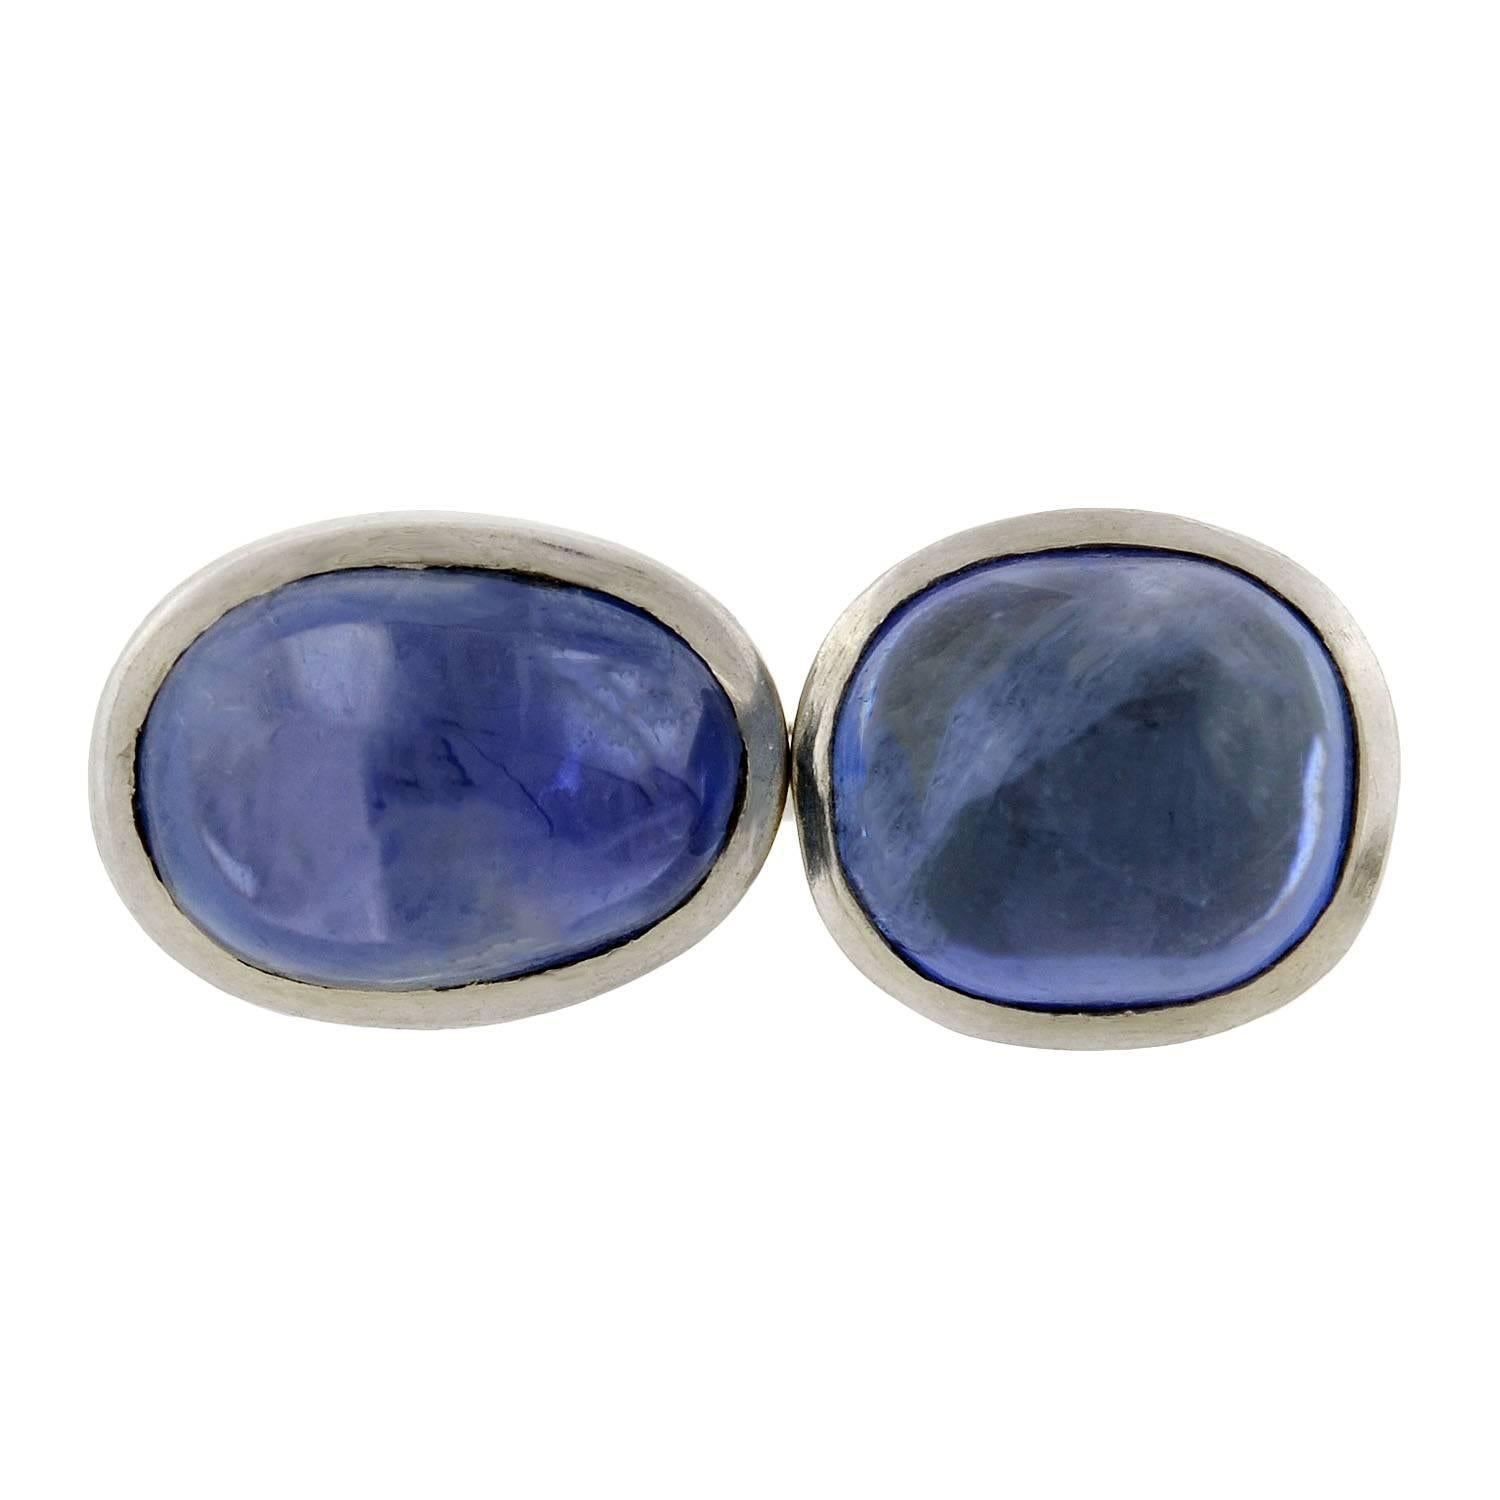 An incredible pair of natural sapphire cufflinks from the Art Deco (ca1920s) era! Crafted in smooth platinum, each of these double-sided cufflinks has a rounded face with a stunning natural sapphire stone set in the center. The rich sapphire